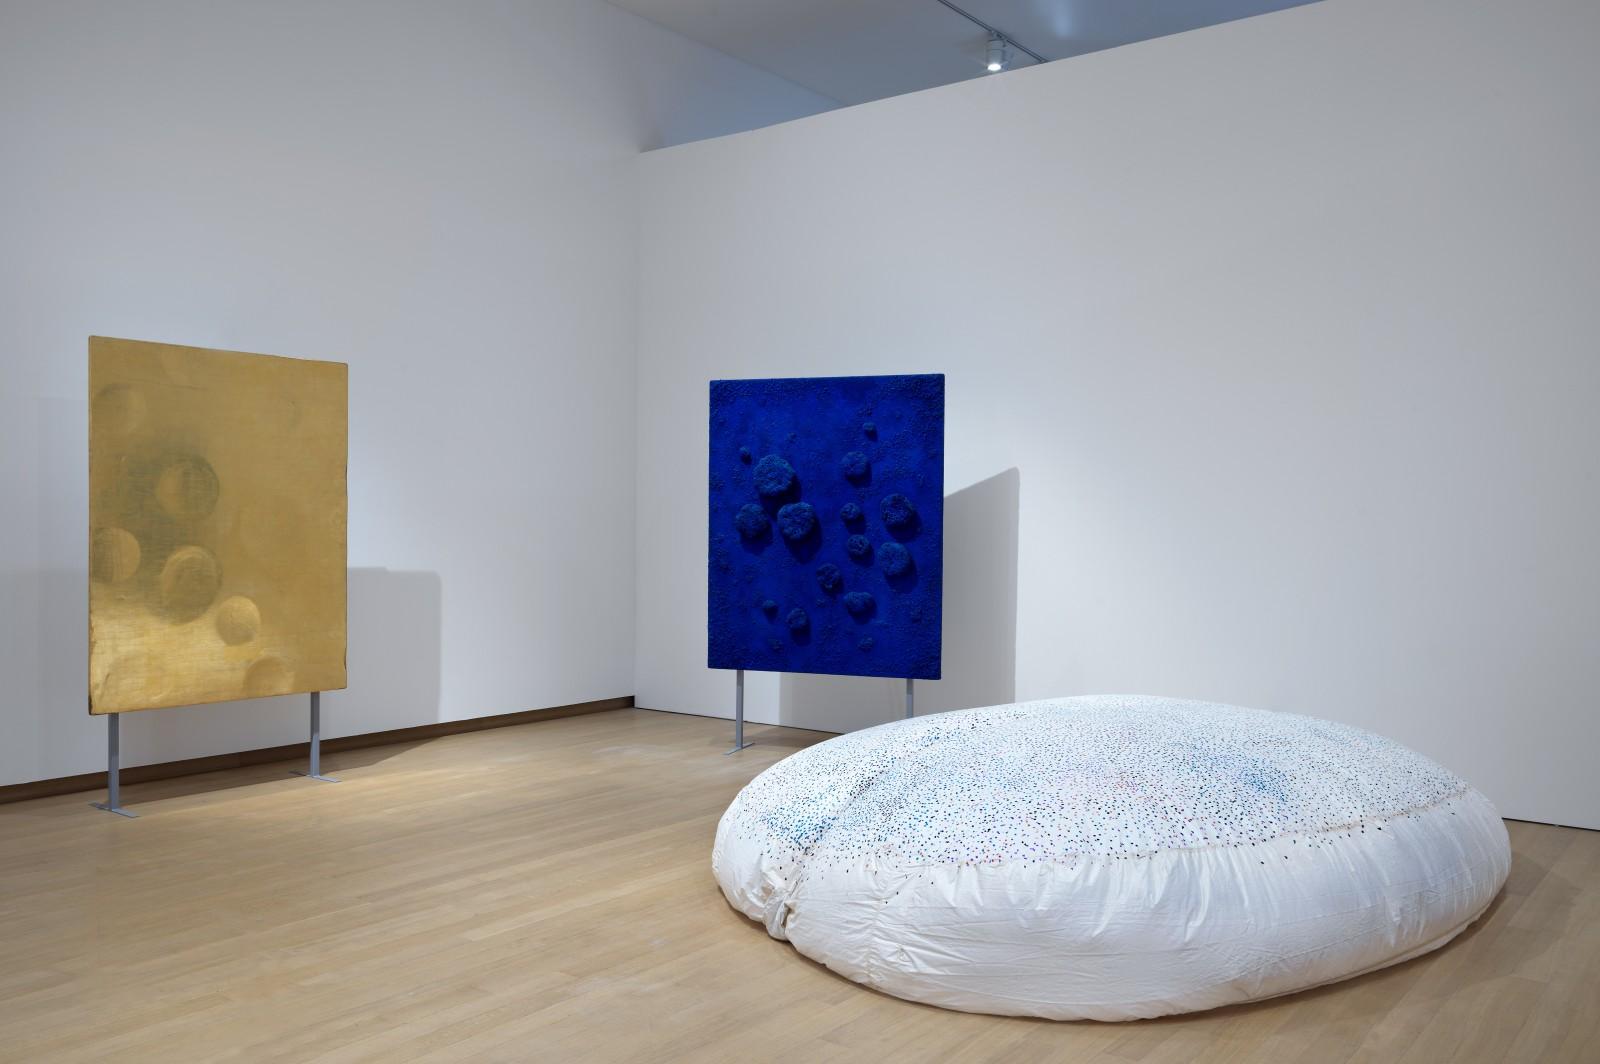 View of the exhibition "ZERO : let us explore the stars", Stedelijk Museum, 2015 (MG 16, RE 10)